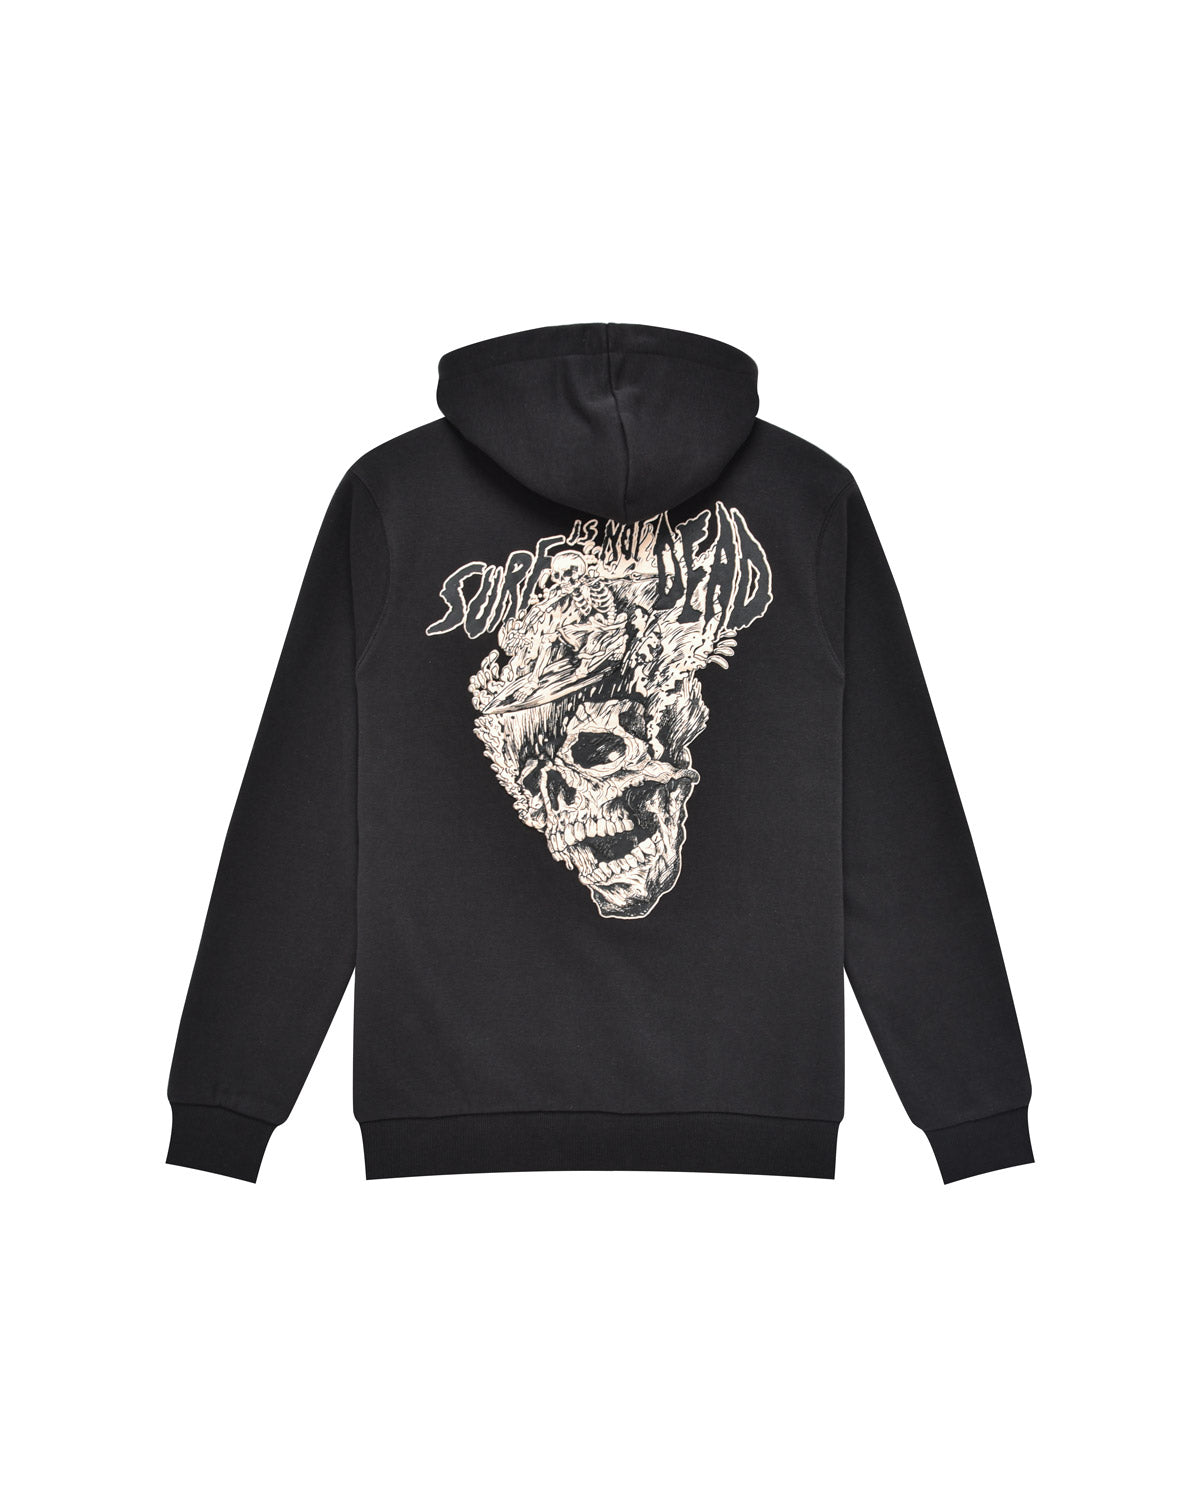 Man | Black Sweatshirt With Hood And "Surf Is Not Dead" Print